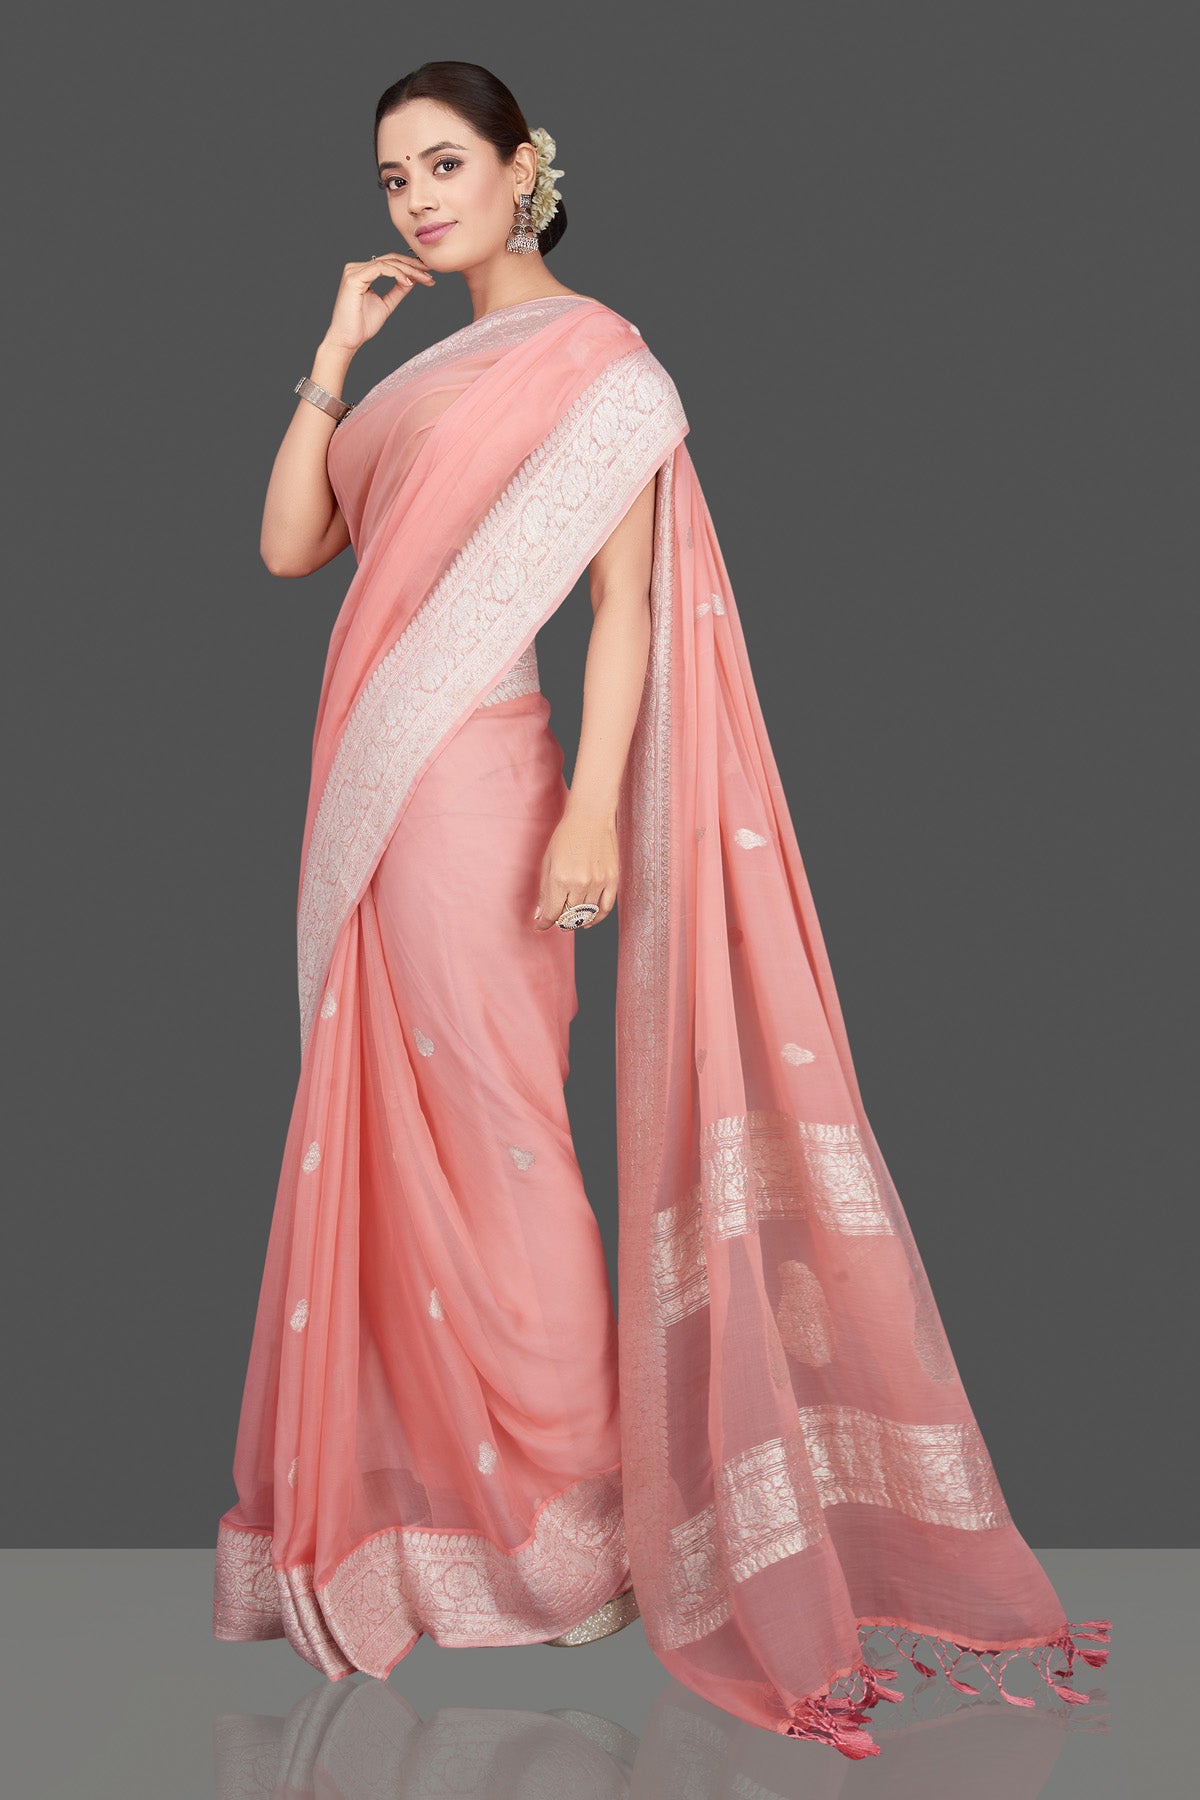 Shop stunning blush pink georgette chiffon sari online in USA with silver zari border. Go for stunning Indian designer sarees, georgette sarees, handwoven saris, embroidered sarees for festive occasions and weddings from Pure Elegance Indian clothing store in USA.-full view